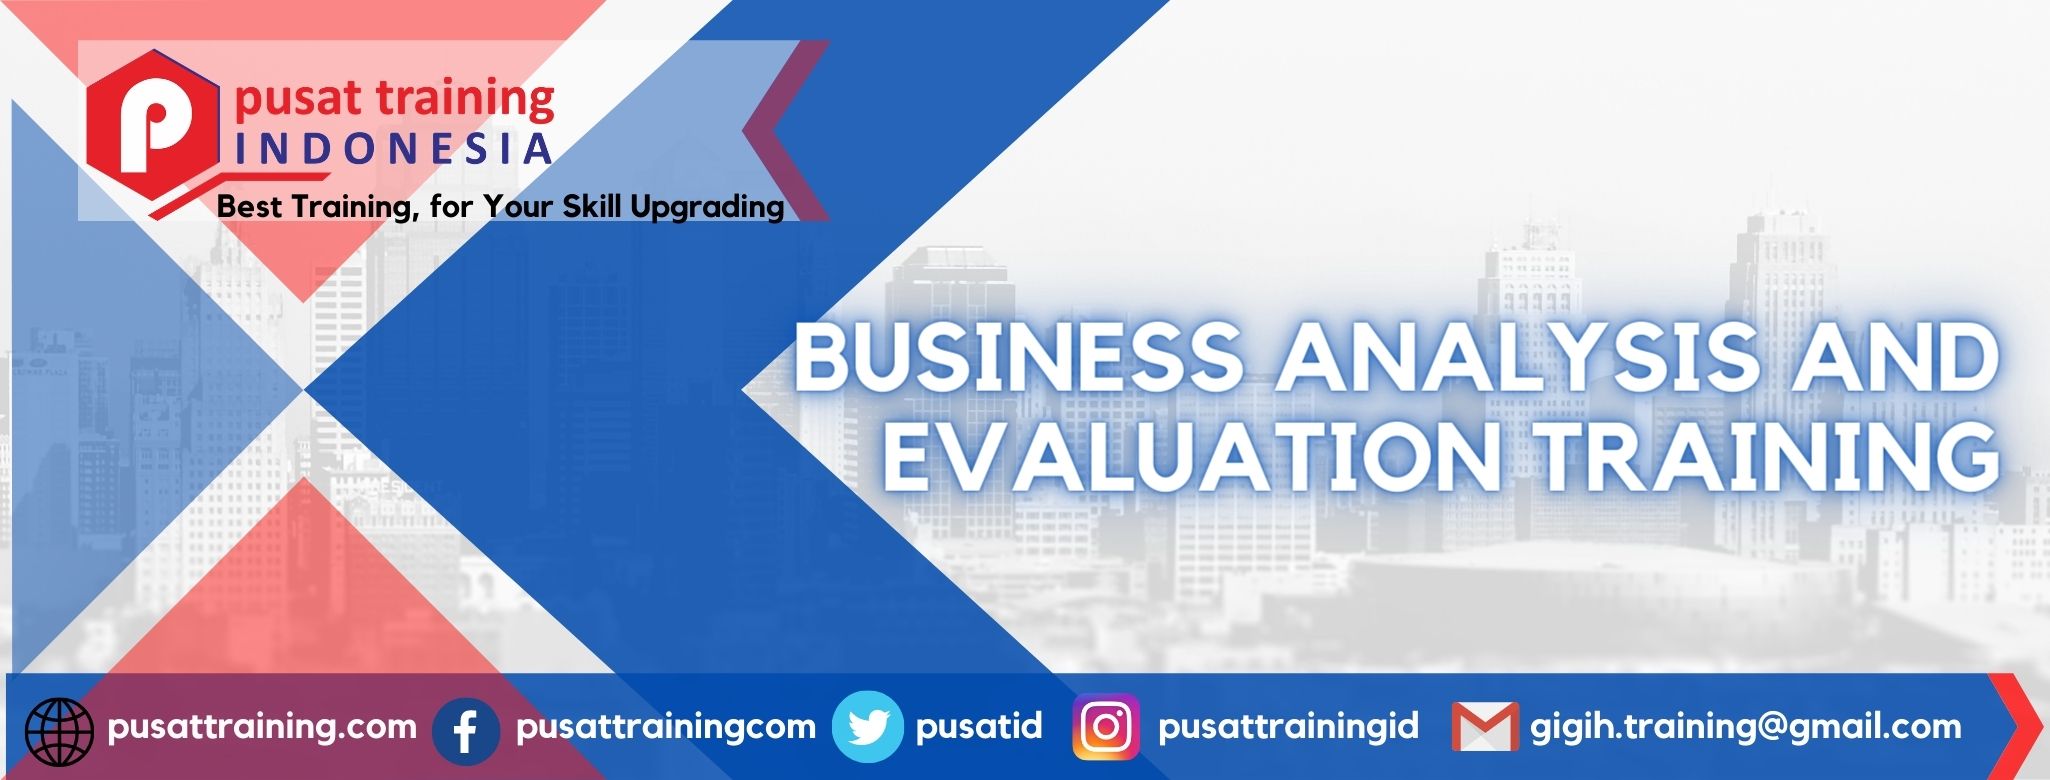 BUSINESS ANALYSIS AND EVALUATION TRAINING